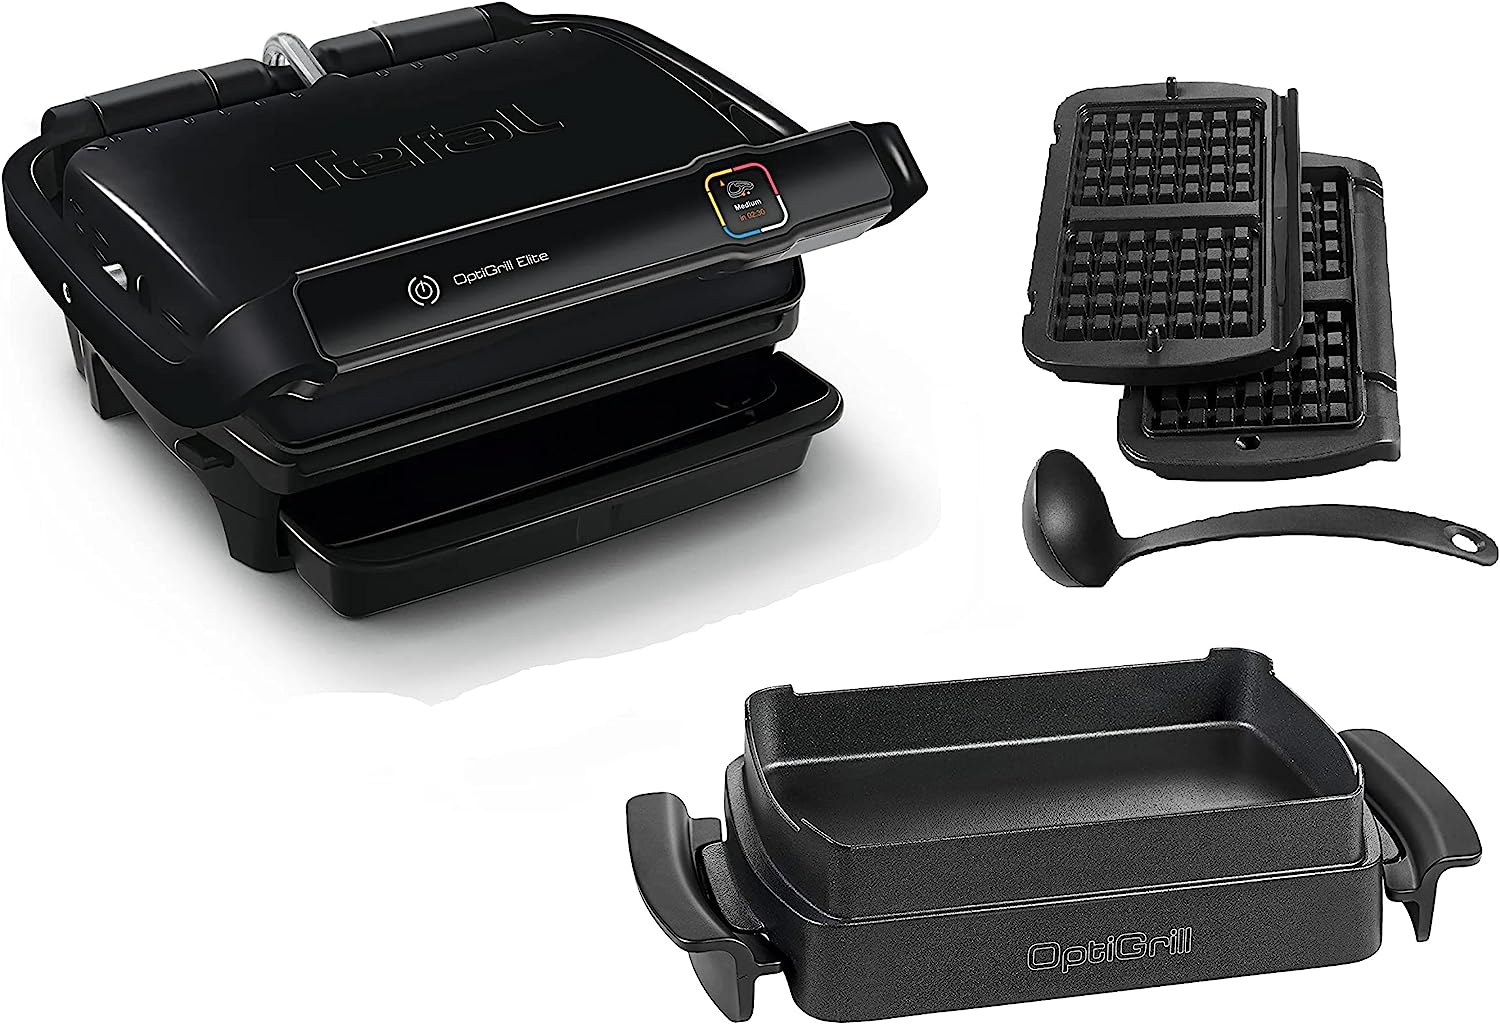 Tefal Optigrill Elite Contact Grill I 2000 Watt I With Snacking & Baking Baking Bowl I Waffle Plates & Ladle I Indoor & Outdoor Grill I 12 Automatic Programs I Touch Display I Stainless Steel